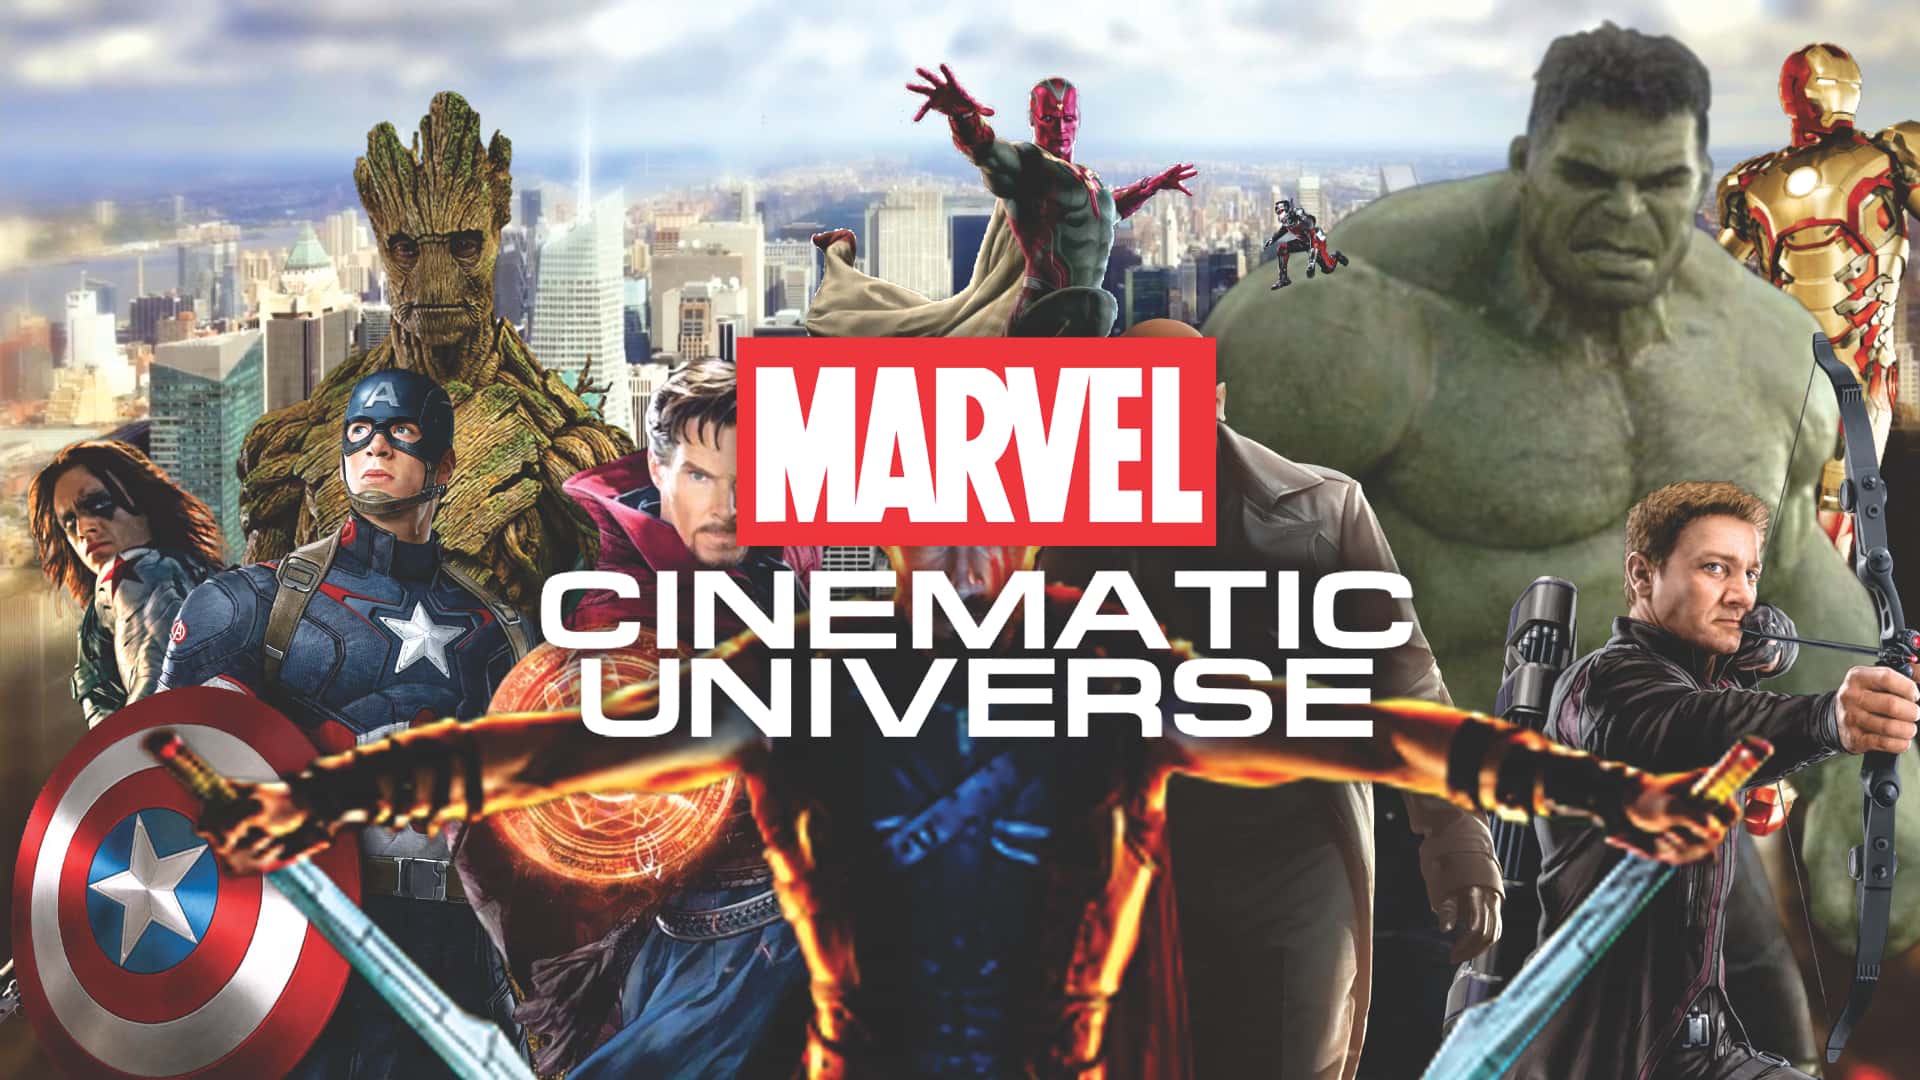 36 Marvelous Facts about the Marvel Cinematic Universe